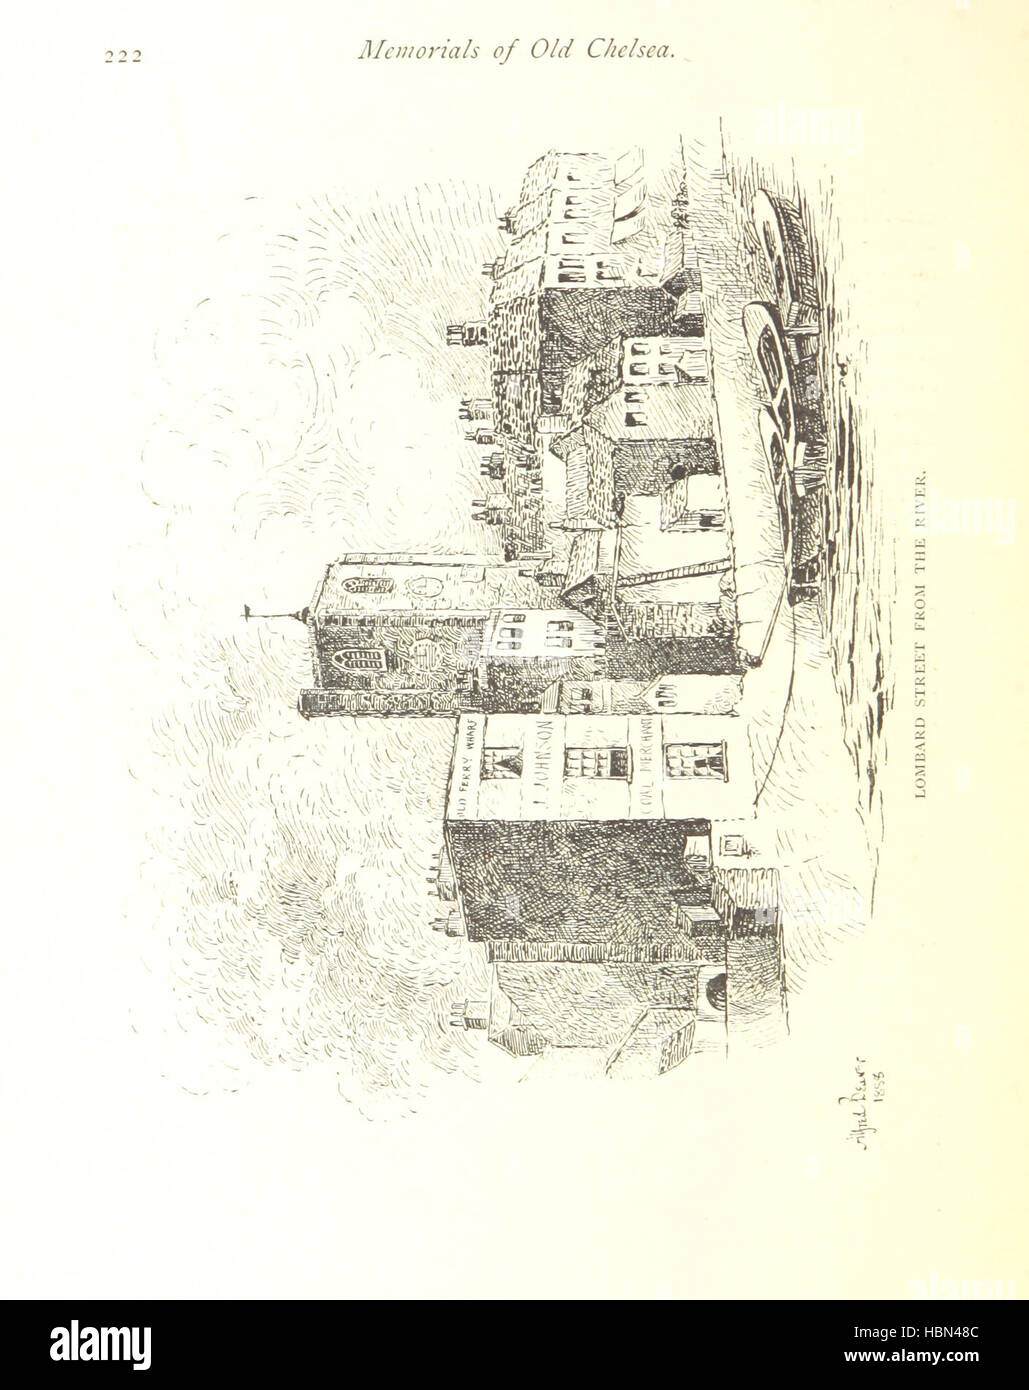 Image taken from page 236 of 'Memorials of Old Chelsea: a new history of the village of palaces ... With numerous illustrations by the author' Image taken from page 236 of 'Memorials of Old Chelsea Stock Photo